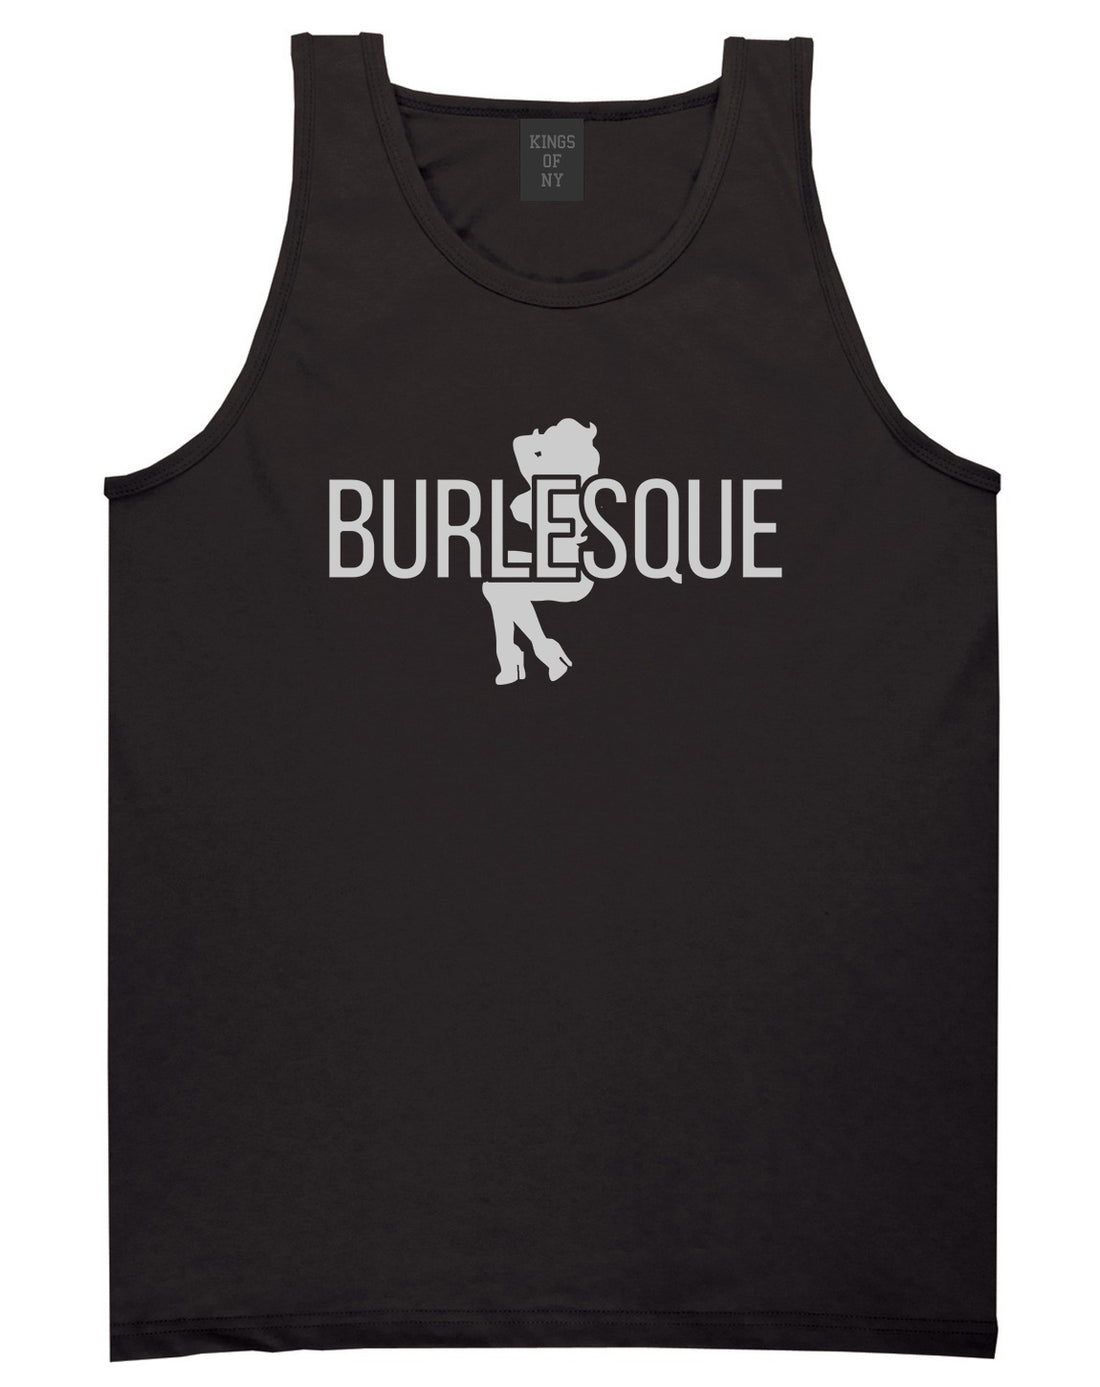 Burlesque Girl Black Tank Top Shirt by Kings Of NY